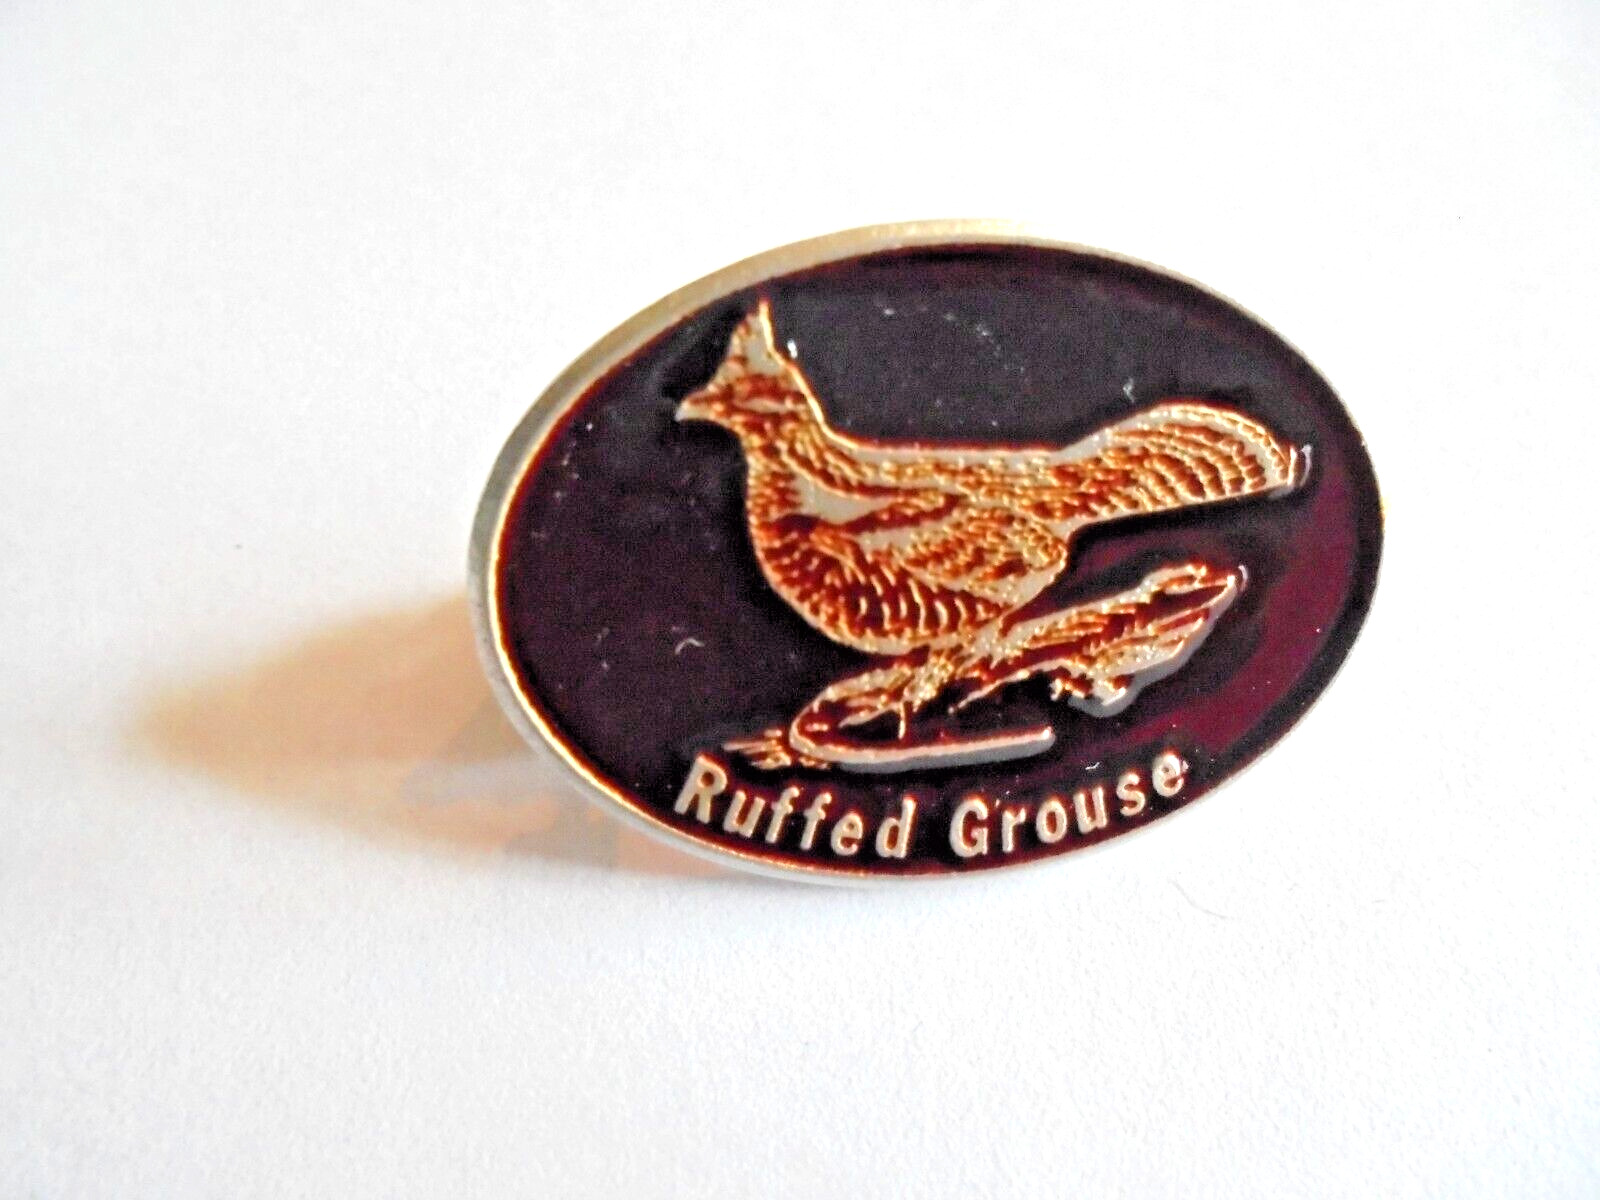 Vintage Ruffed Grouse Enameled Pewter Hunter / Hunting Pin